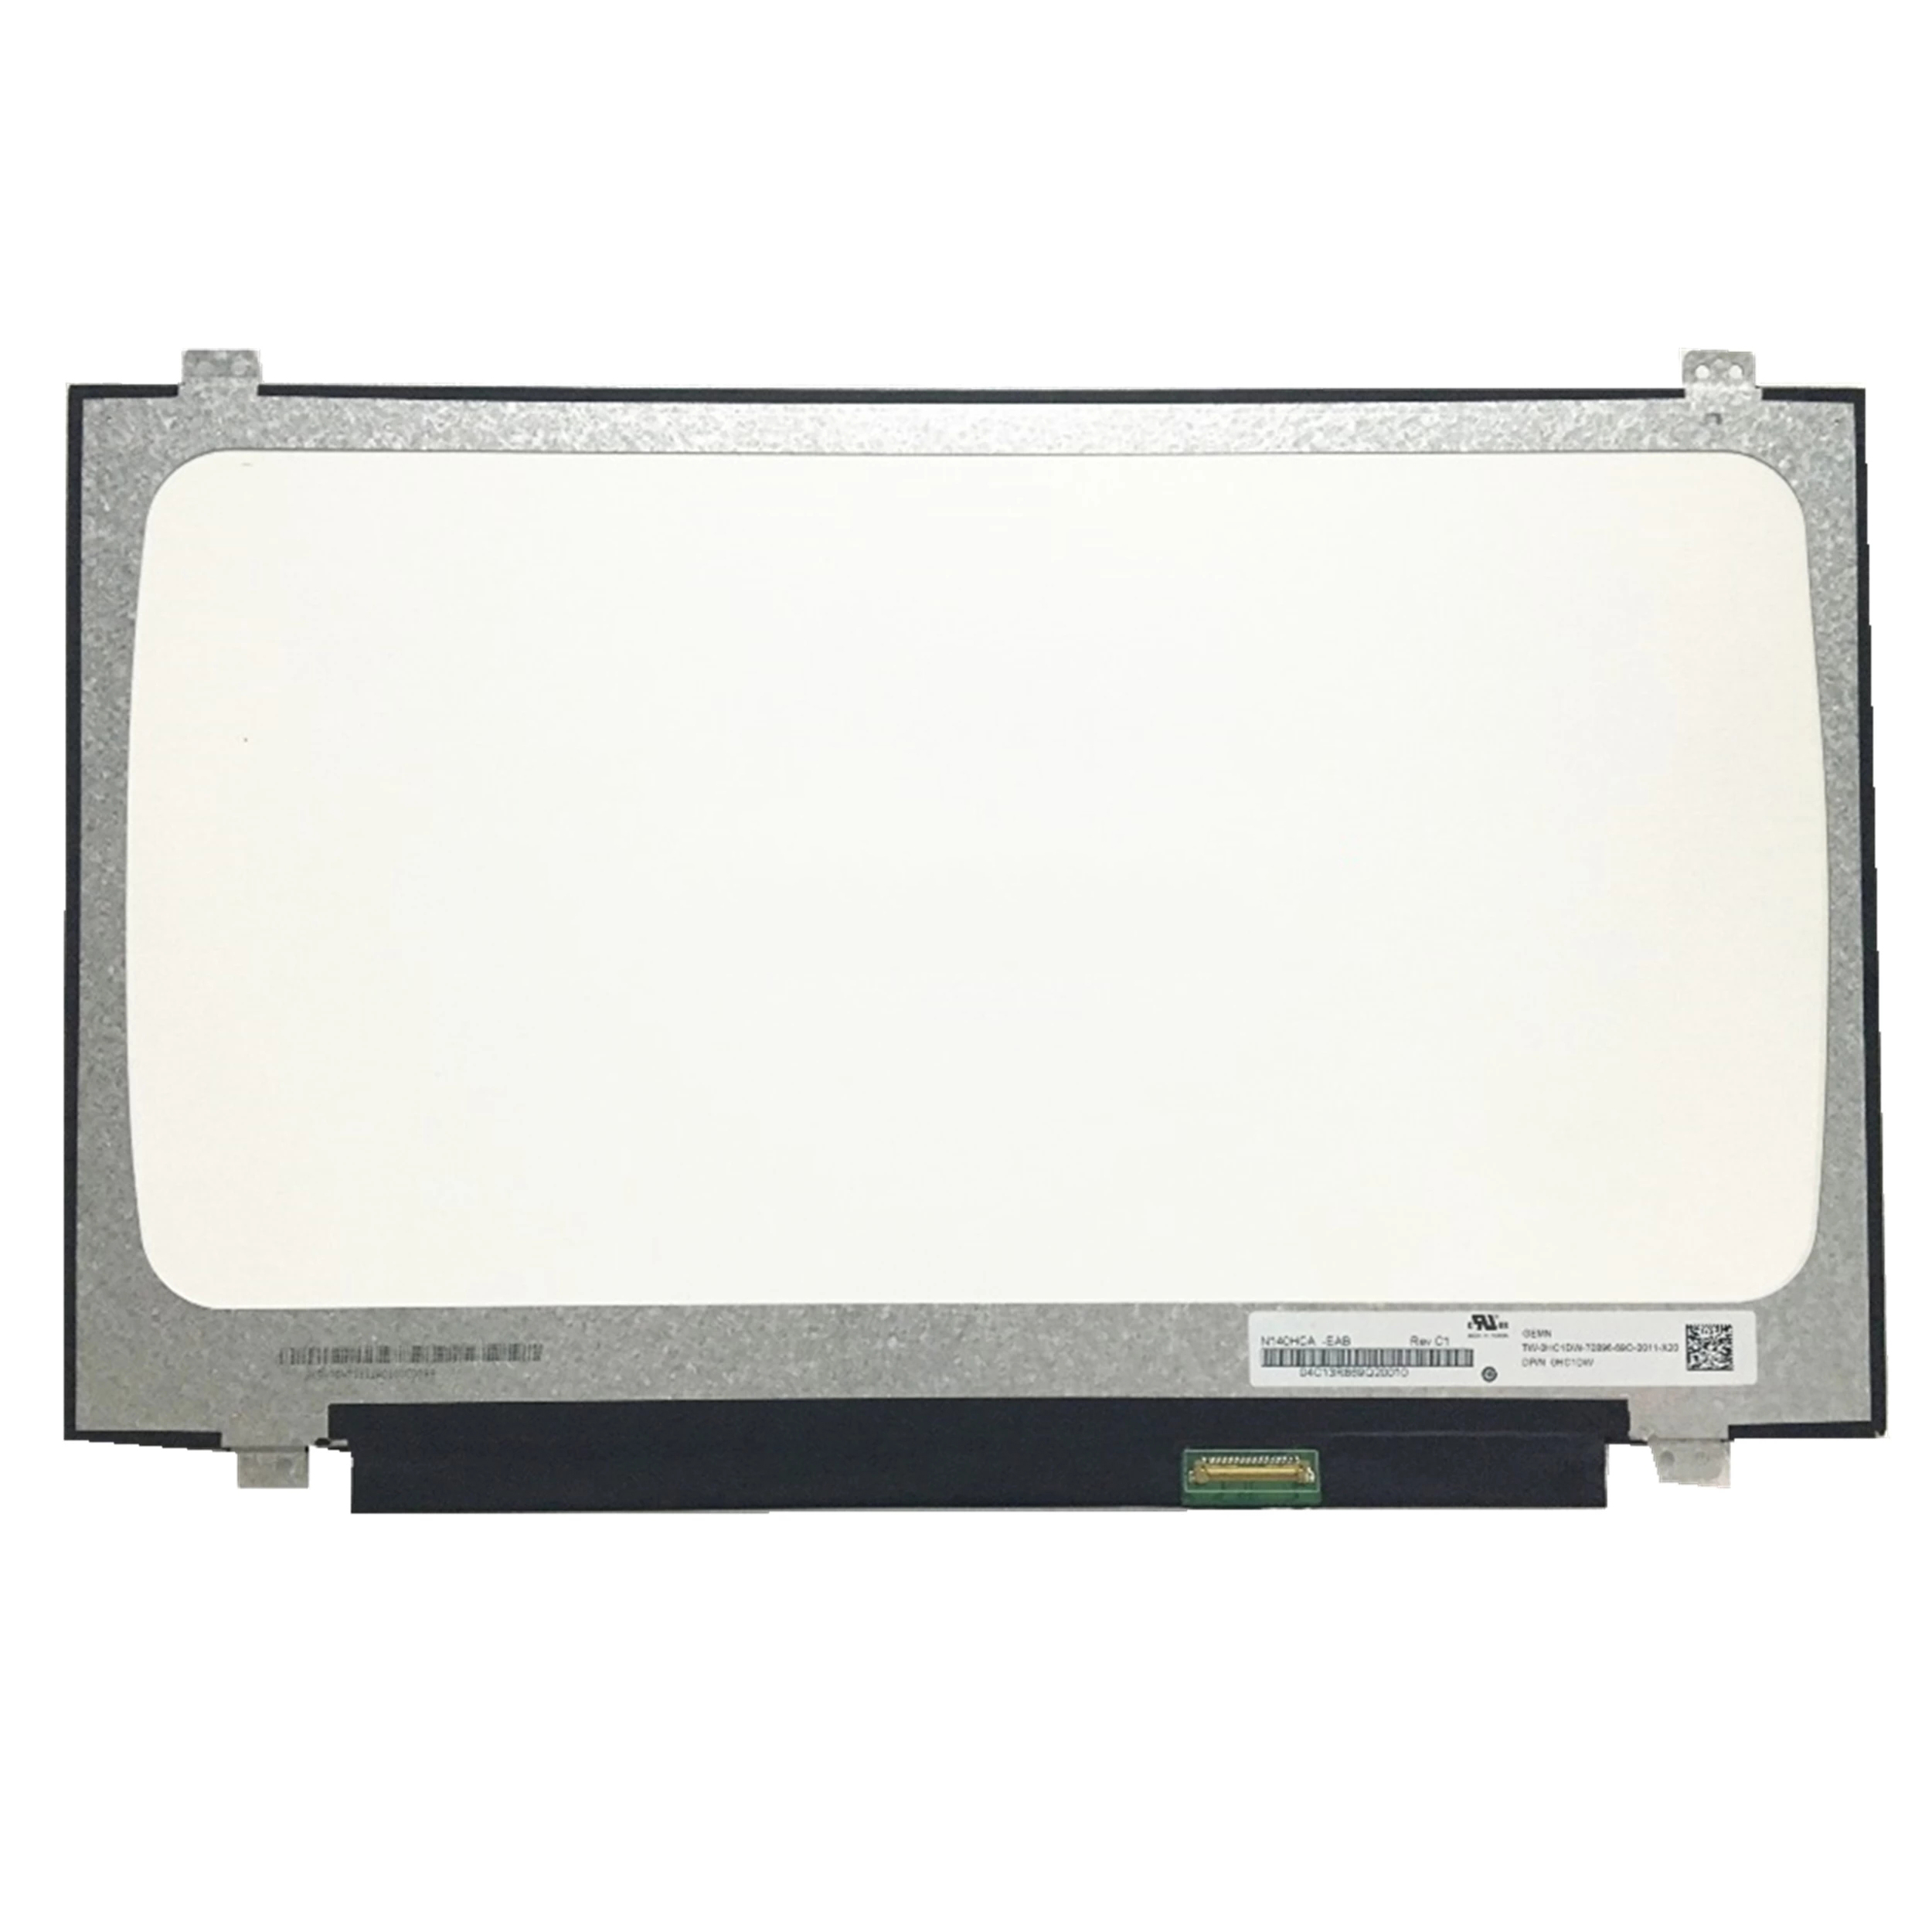 New Slim IPS FHD Normal LED Display 30pin Lcd Screen N140HCA-EAB For Innolux 1920*1080 FHD Laptop Lcd Screen